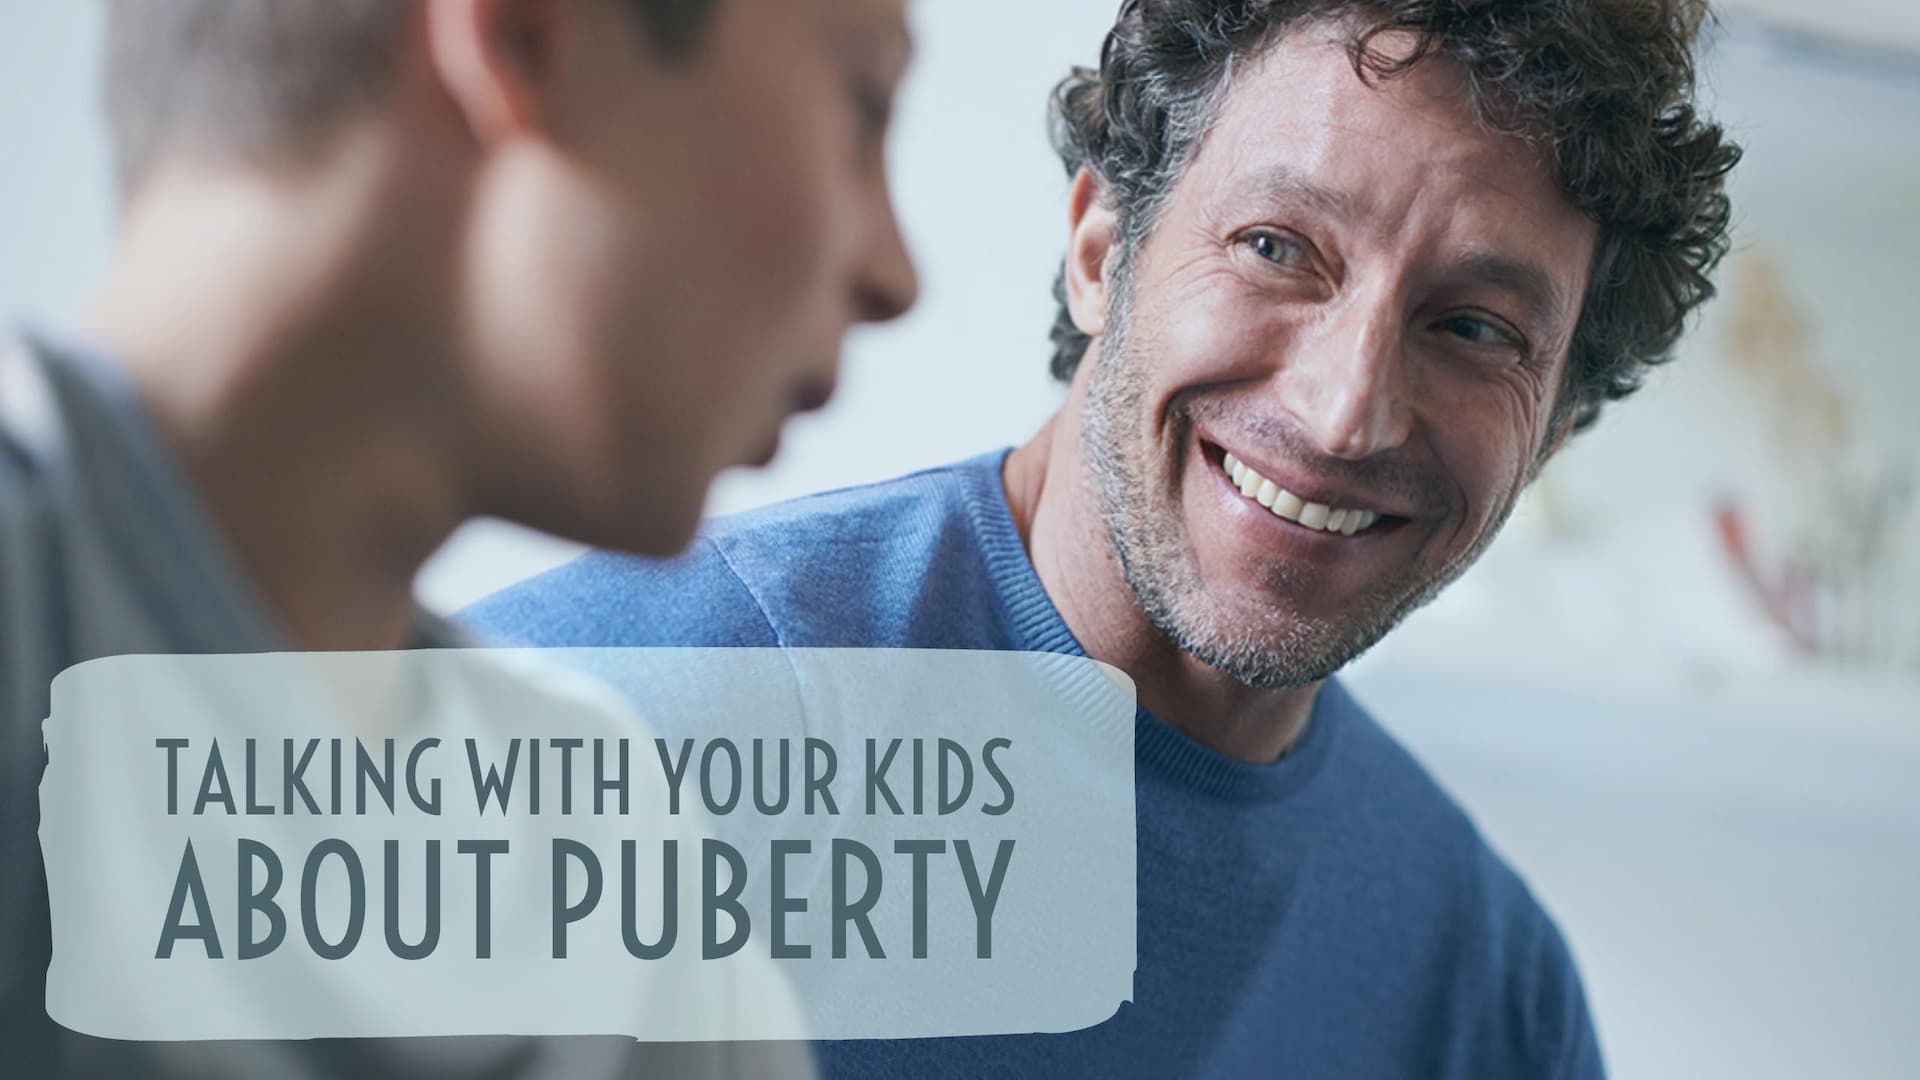 How To Talk With Your Kids About Puberty